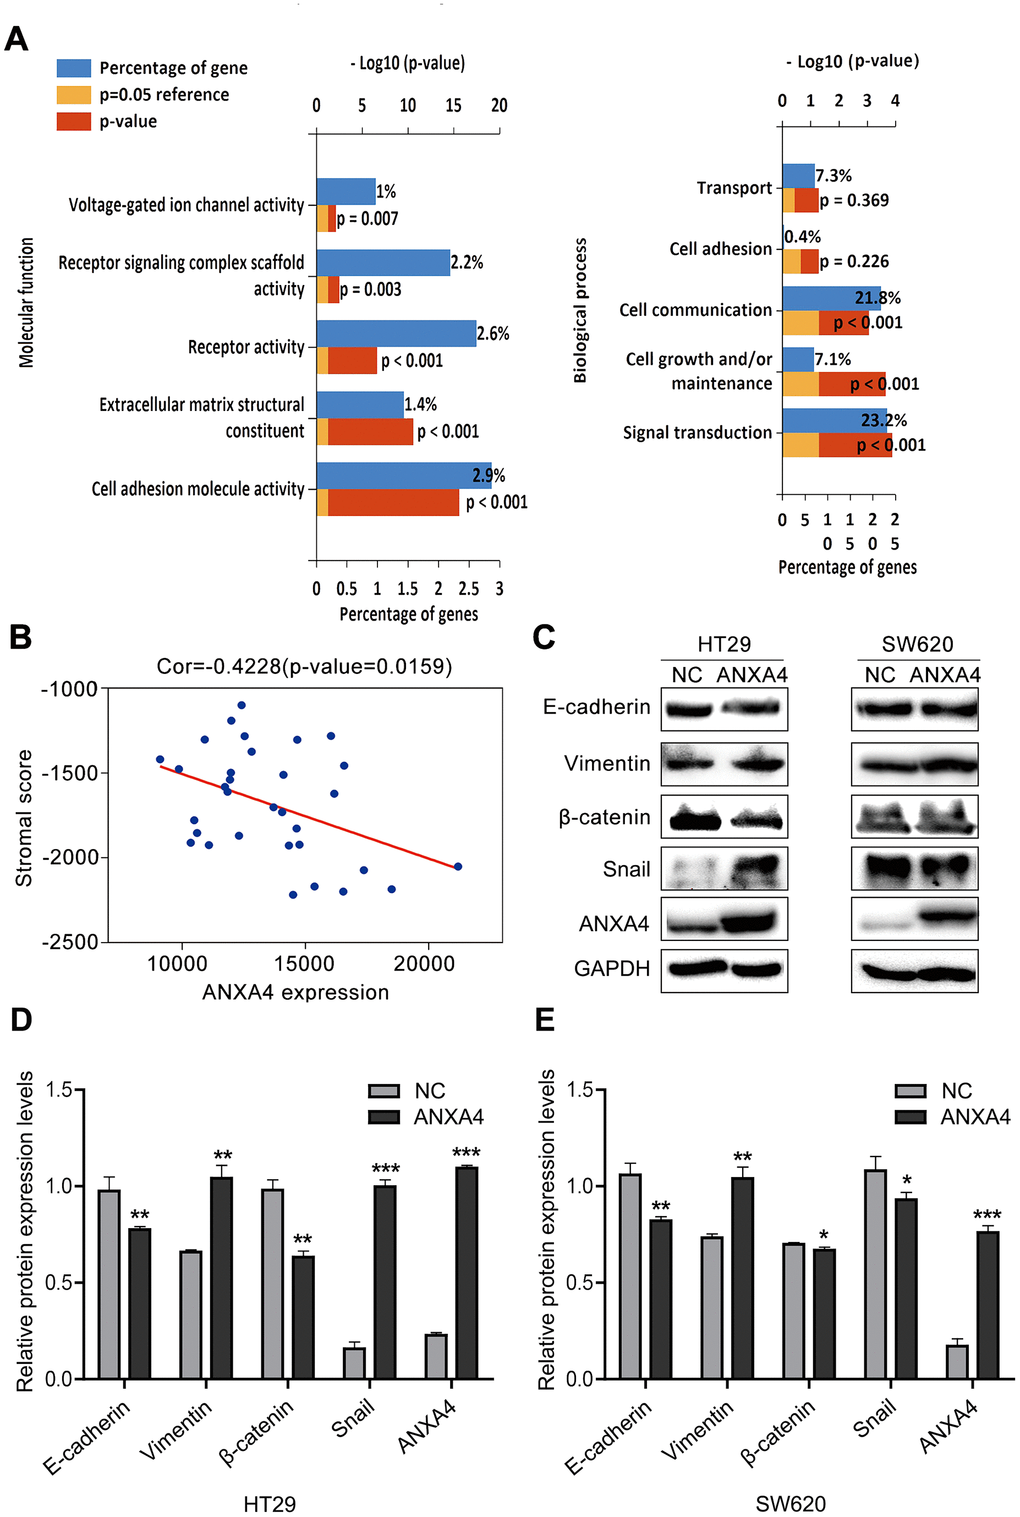 ANXA4 downregulated the stromal response in CRC. (A) Common molecular function and biological process enrichment terms of ANXA4 determined by GO analysis. (B) Negative correlation analysis between ANXA4 and the stromal score. (C) Effects of ANXA4 overexpression on the EMT-related molecules E-cadherin, Vimentin, β-catenin and Snail. GAPDH was used as the loading control for total protein. (D, E) Relative quantitative analysis of E-cadherin, Vimentin, β-catenin and Snail expression in HT-29 cells (D) and SW620 cells (E). *p 